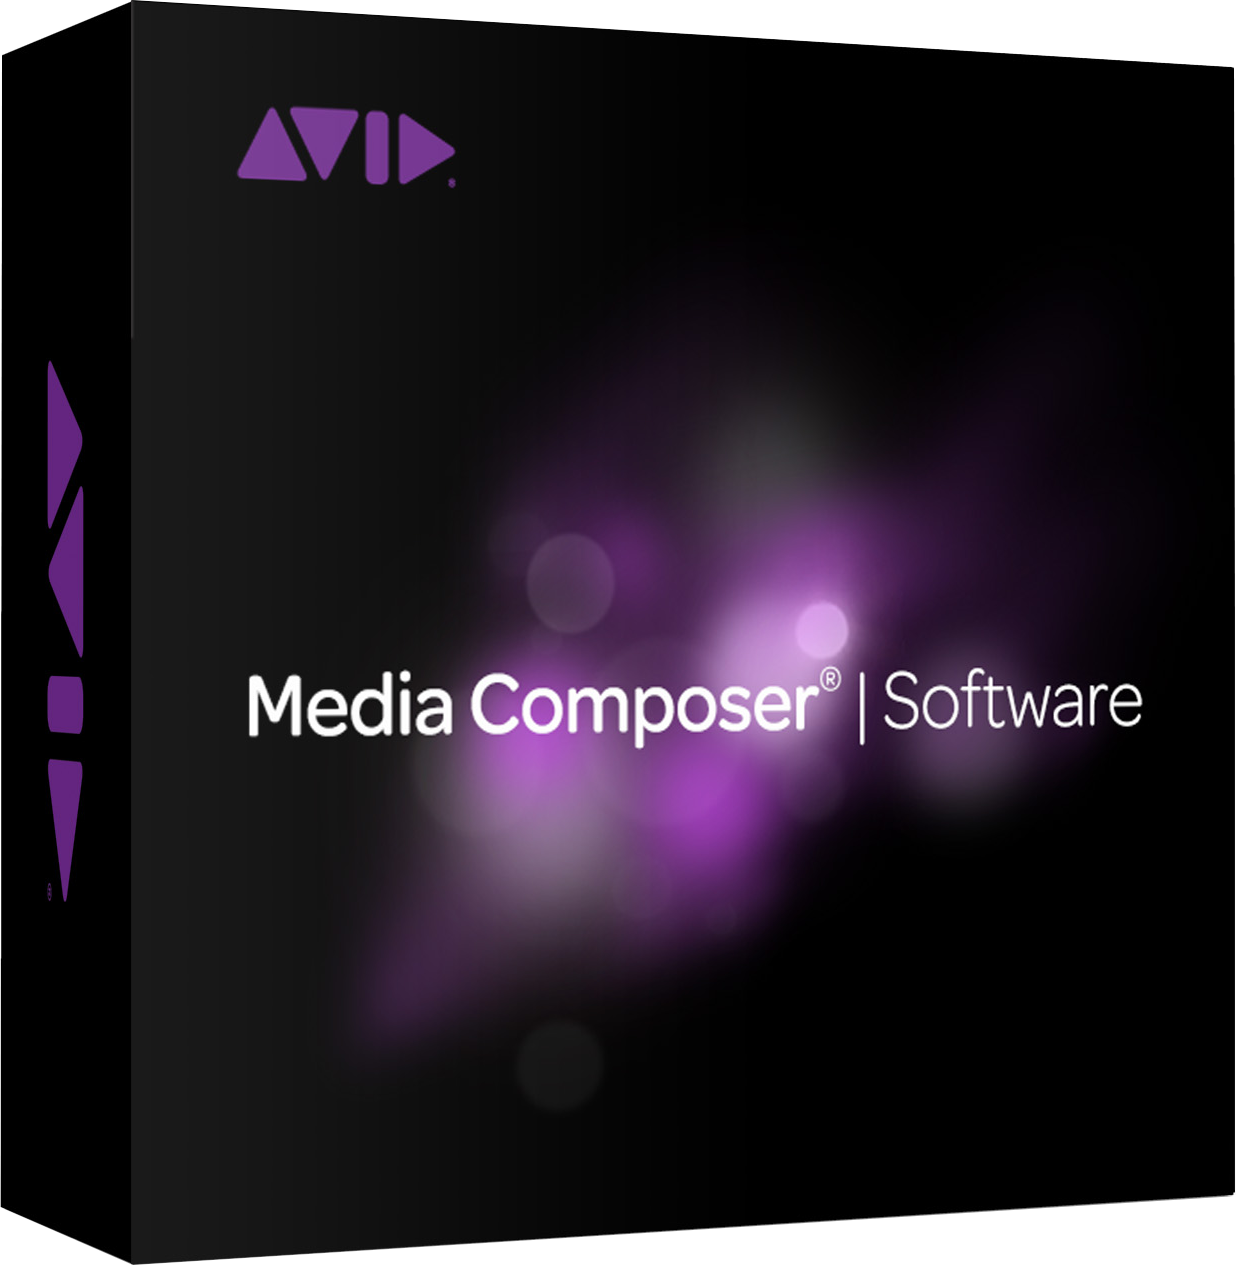 AVID Artist DNxID with 2 year Media Composer Subscription